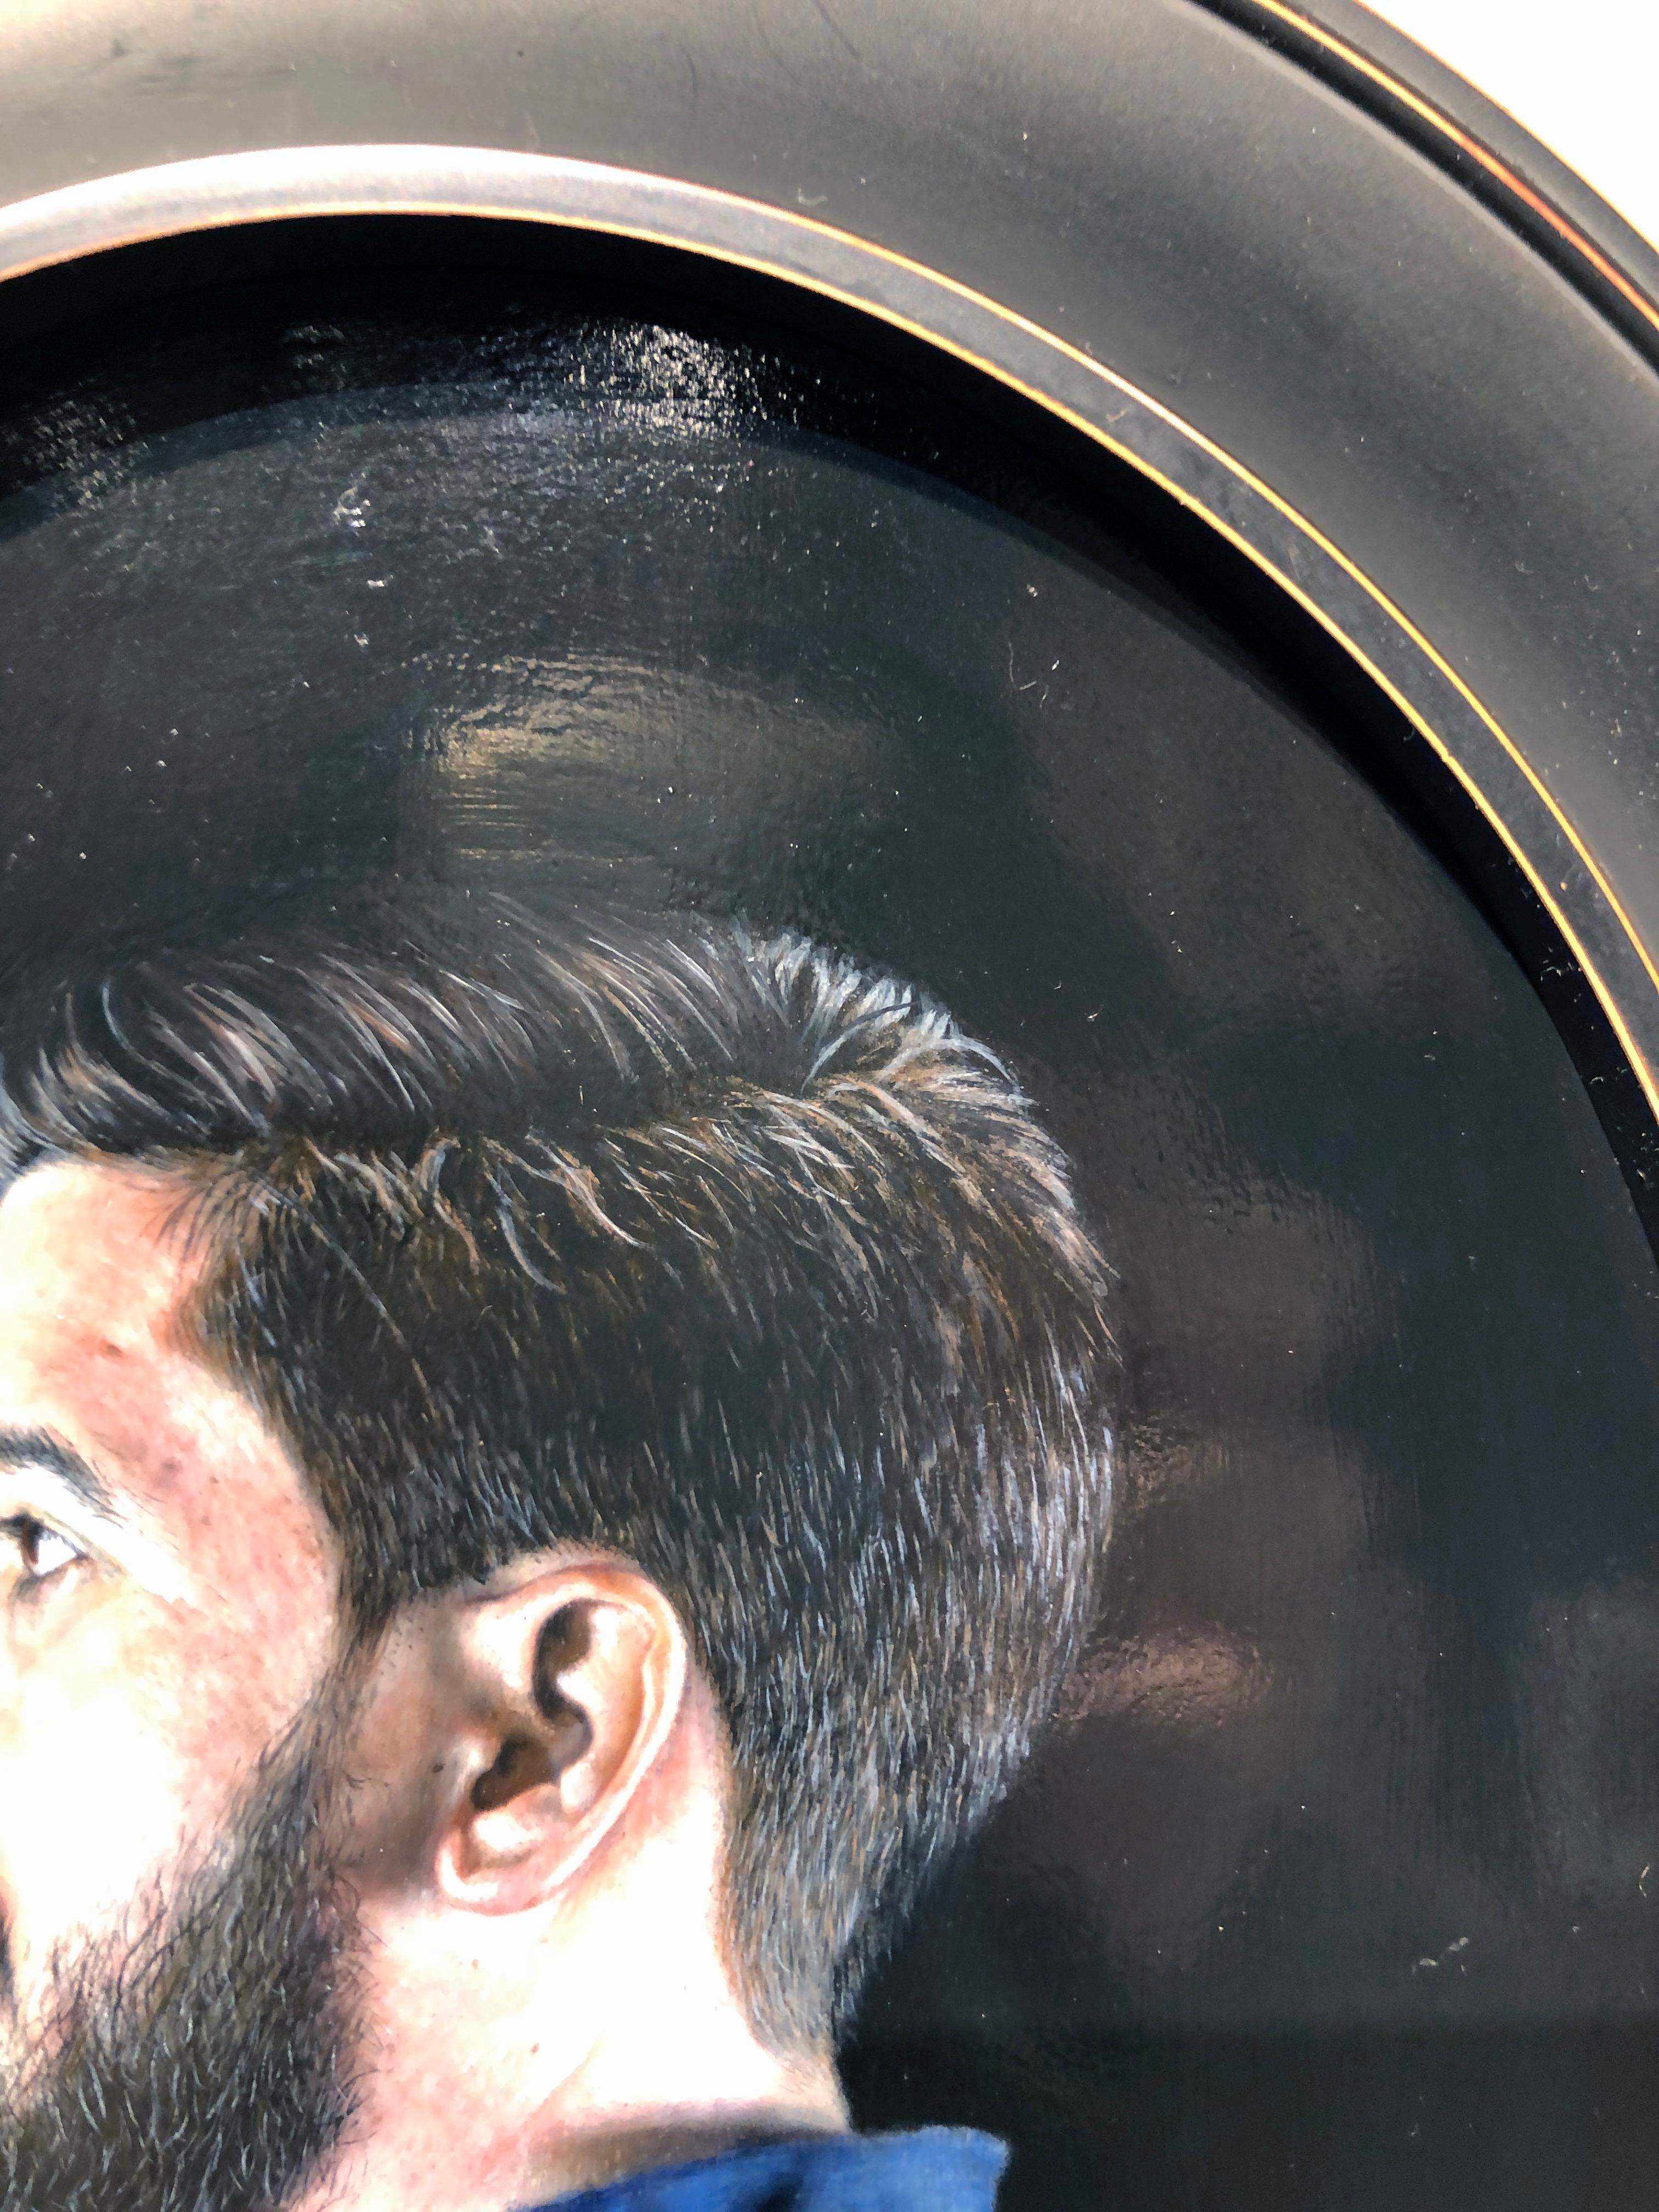 The Artist in Profile - Oval Shaped Portrait Painting in Extraordinary Detail - Black Figurative Painting by Matthew Cook